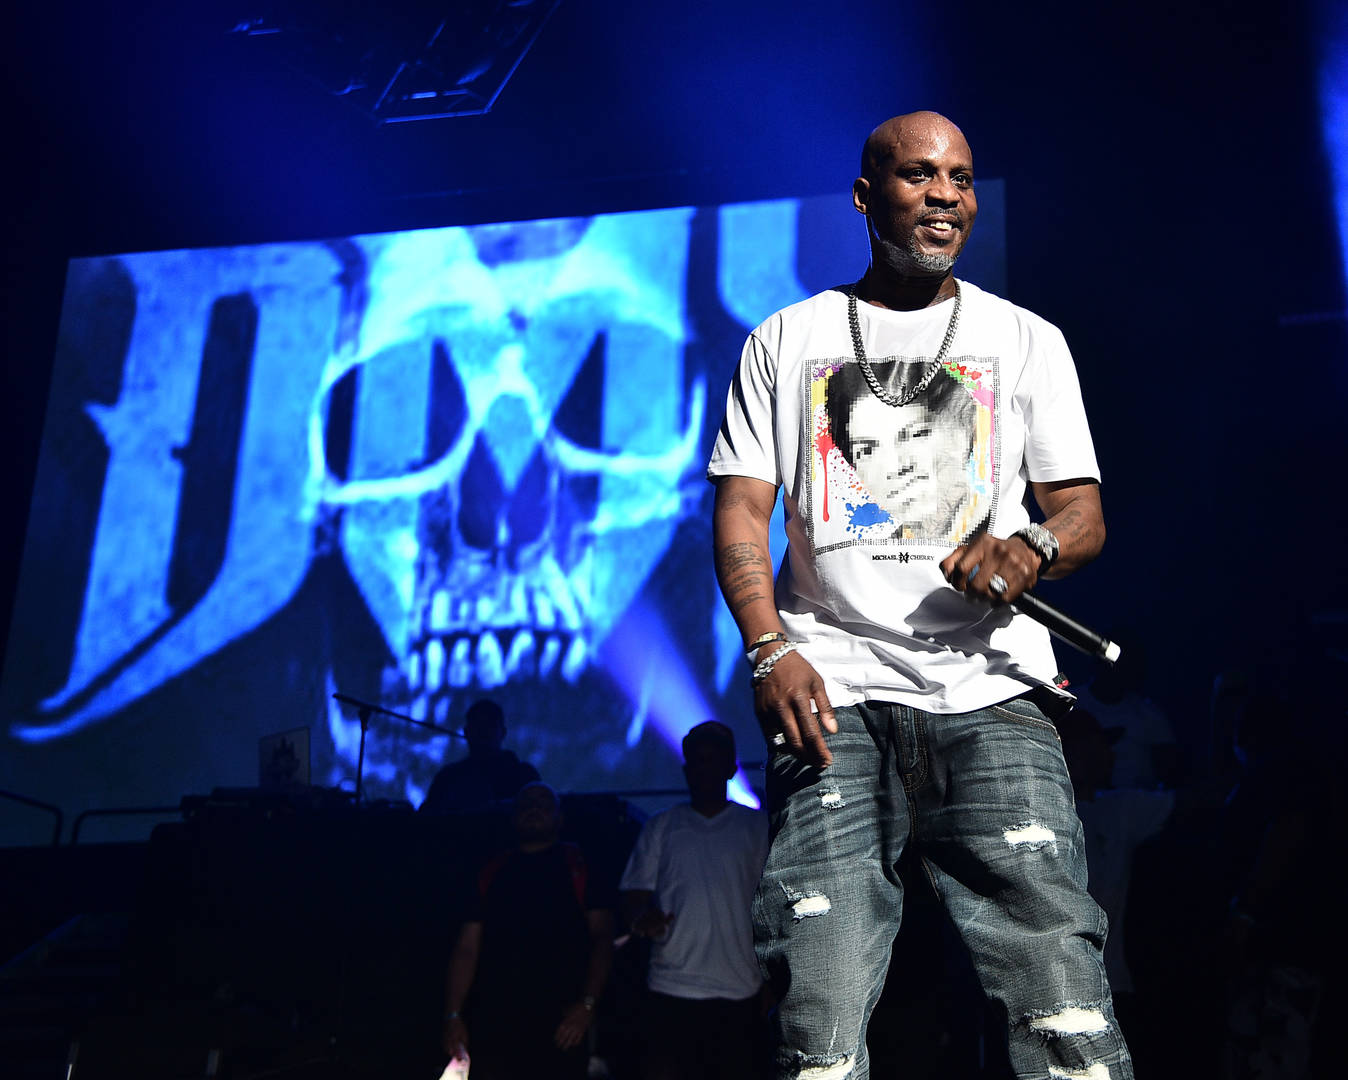 DMX Memorial Service Details Shared, Public Not Permitted To Attend 34